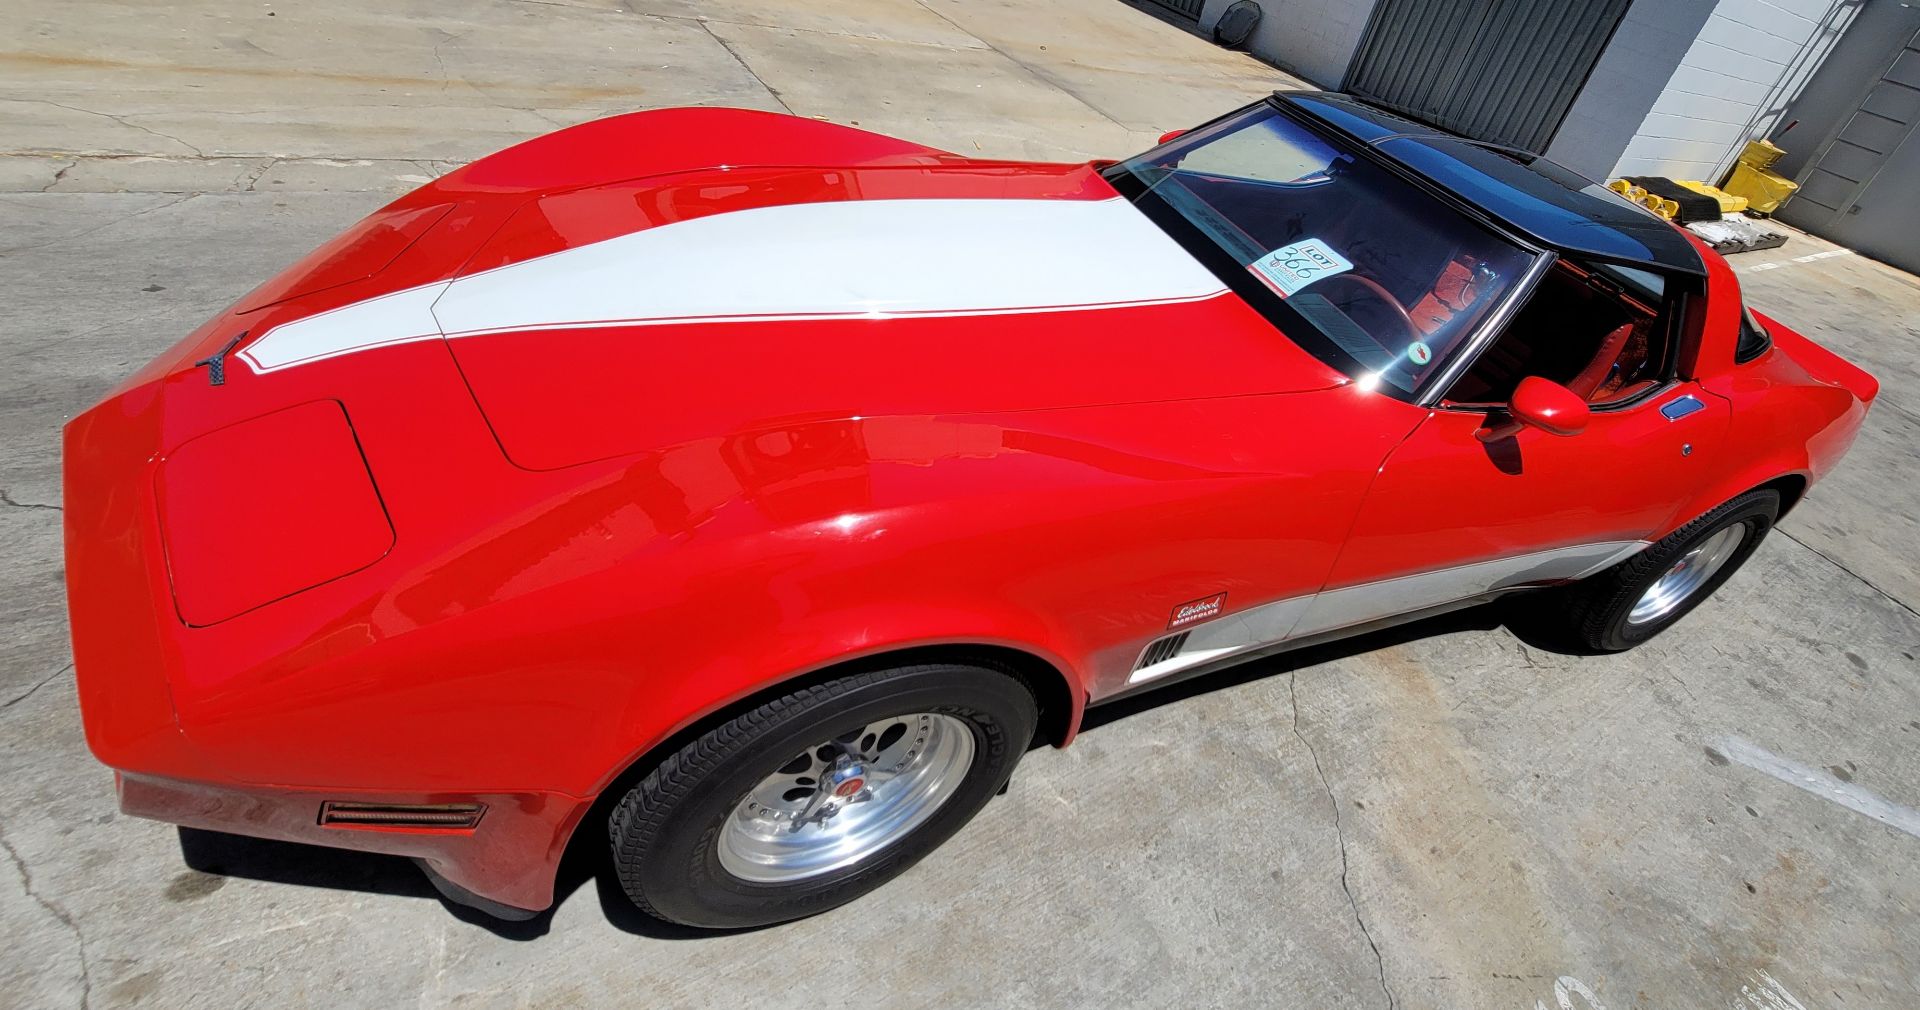 1980 CHEVROLET CORVETTE, WAS VIC EDELBROCK'S PERSONAL CAR BOUGHT FOR R&D, RED INTERIOR, TITLE ONLY. - Image 34 of 70